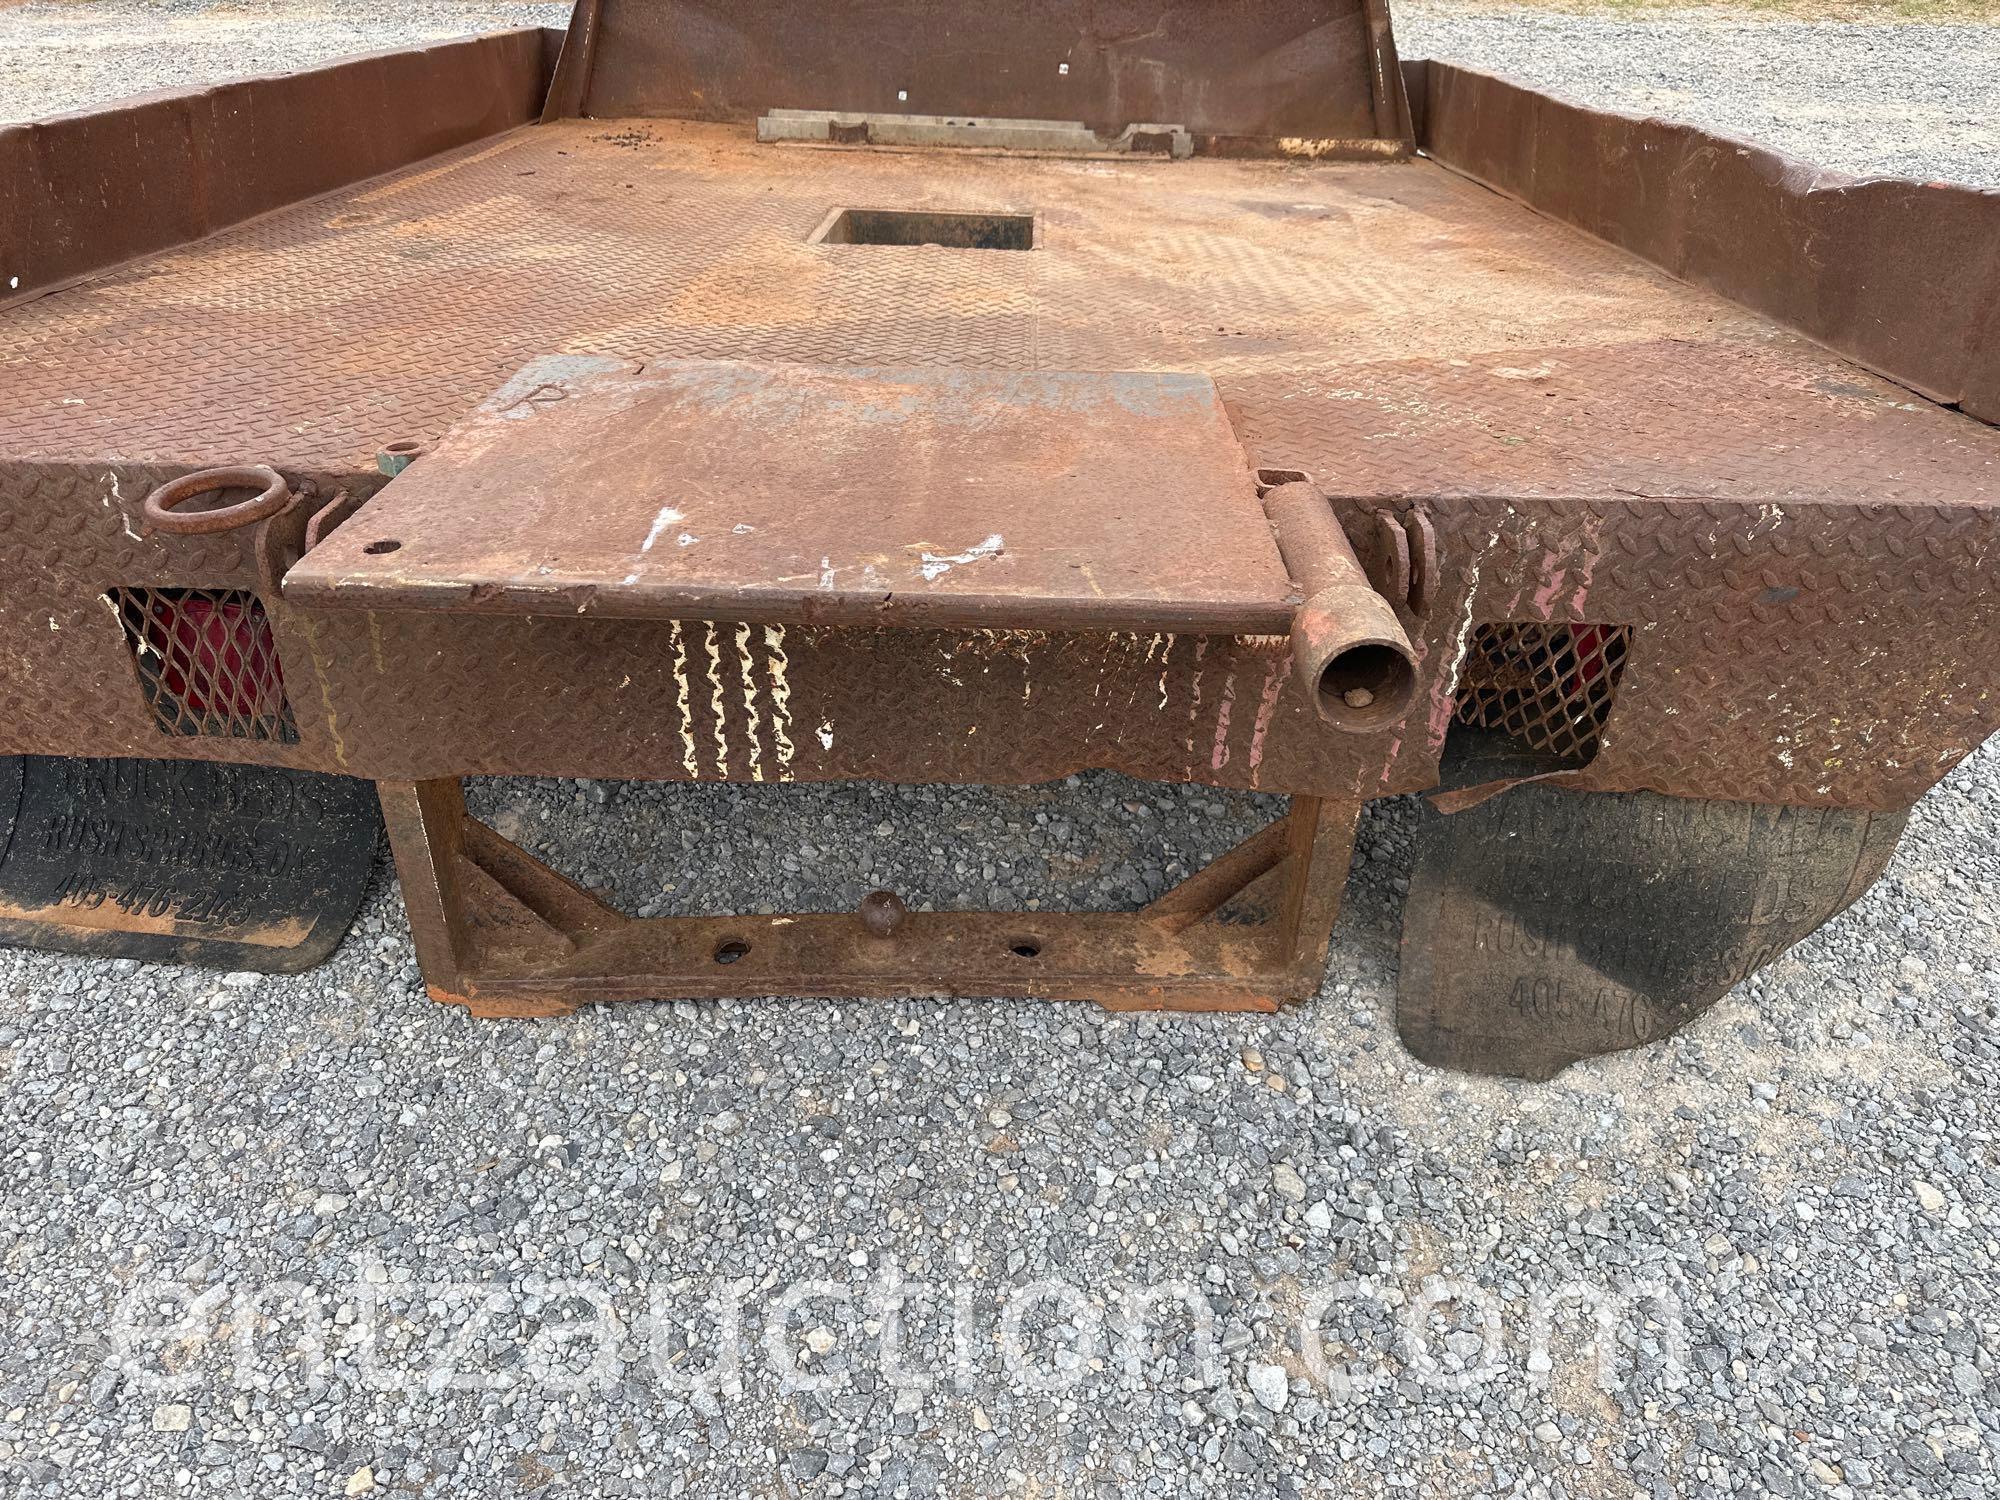 9' STEEL FLATBED, GN HITCH, CAME OFF